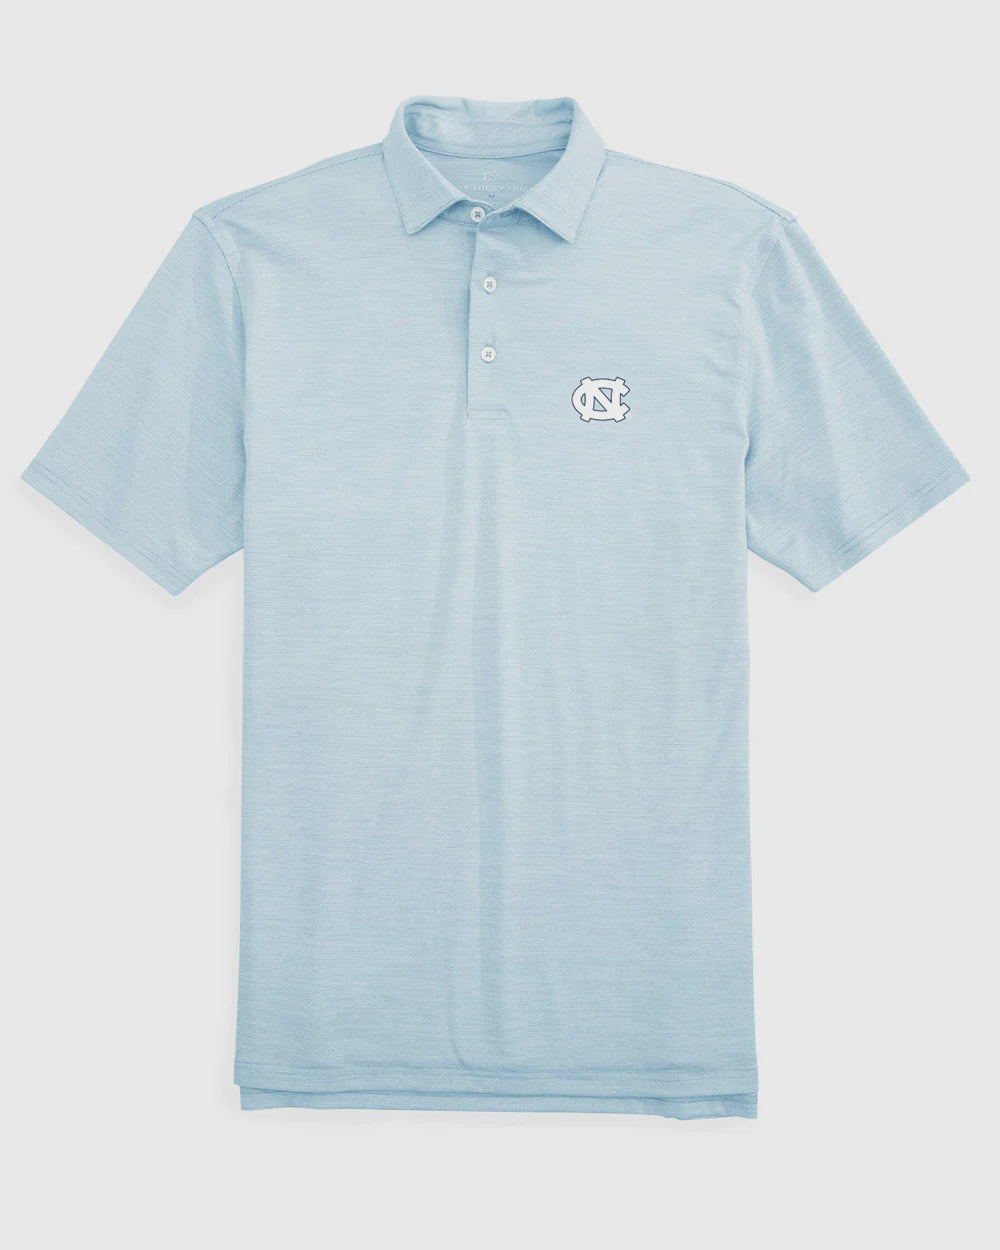 North Carolina Blue Driver Spacedye Perf Polo by Southern Tide